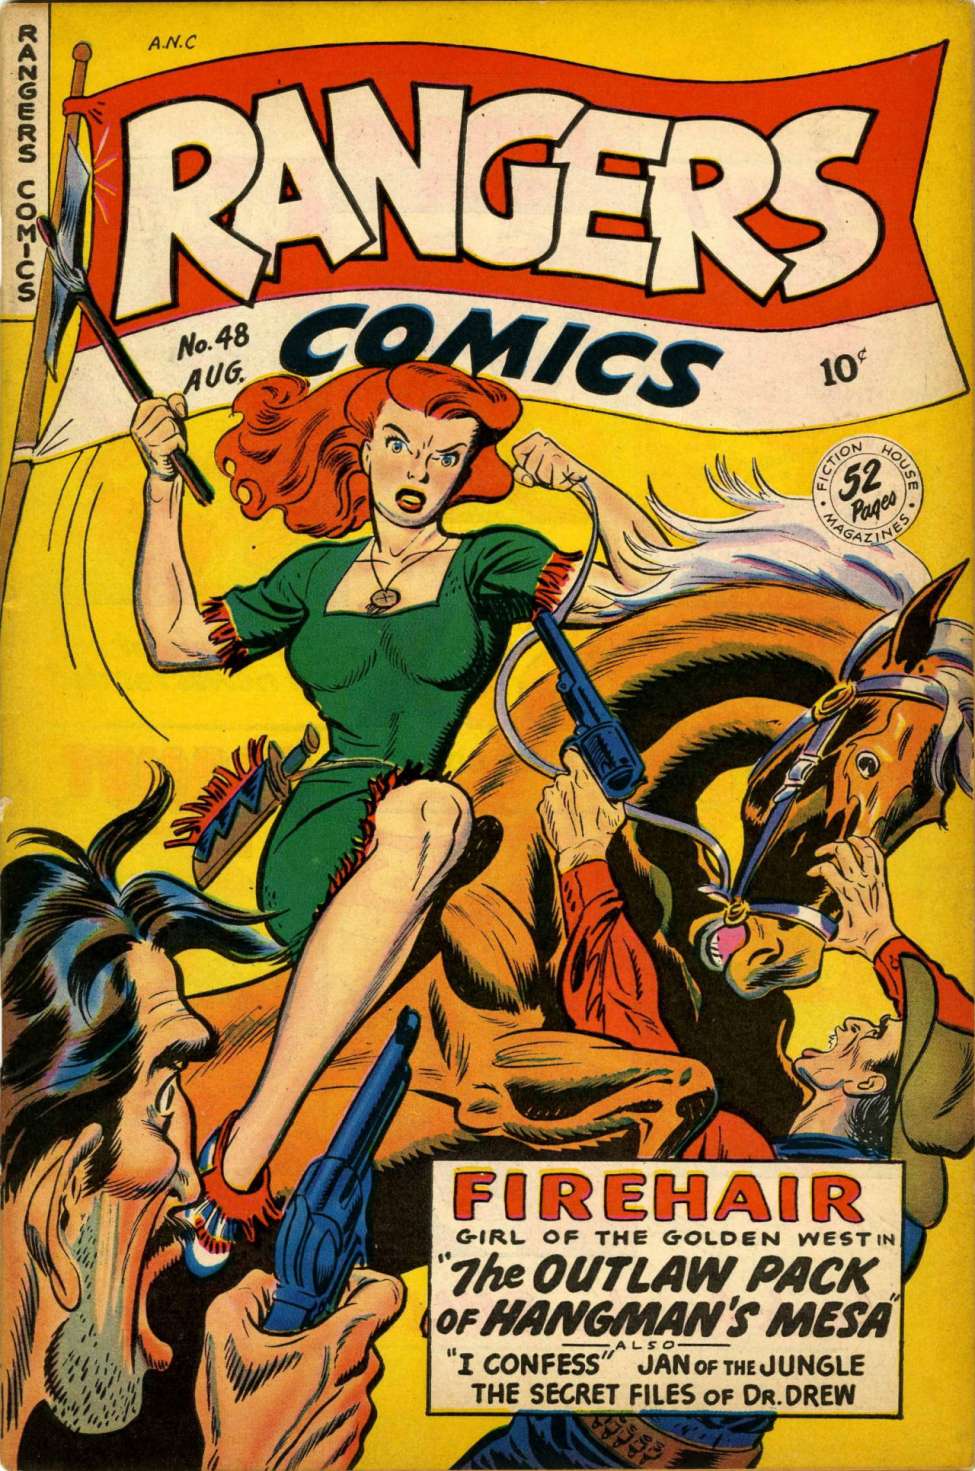 Comic Book Cover For Rangers Comics 48 - Version 1